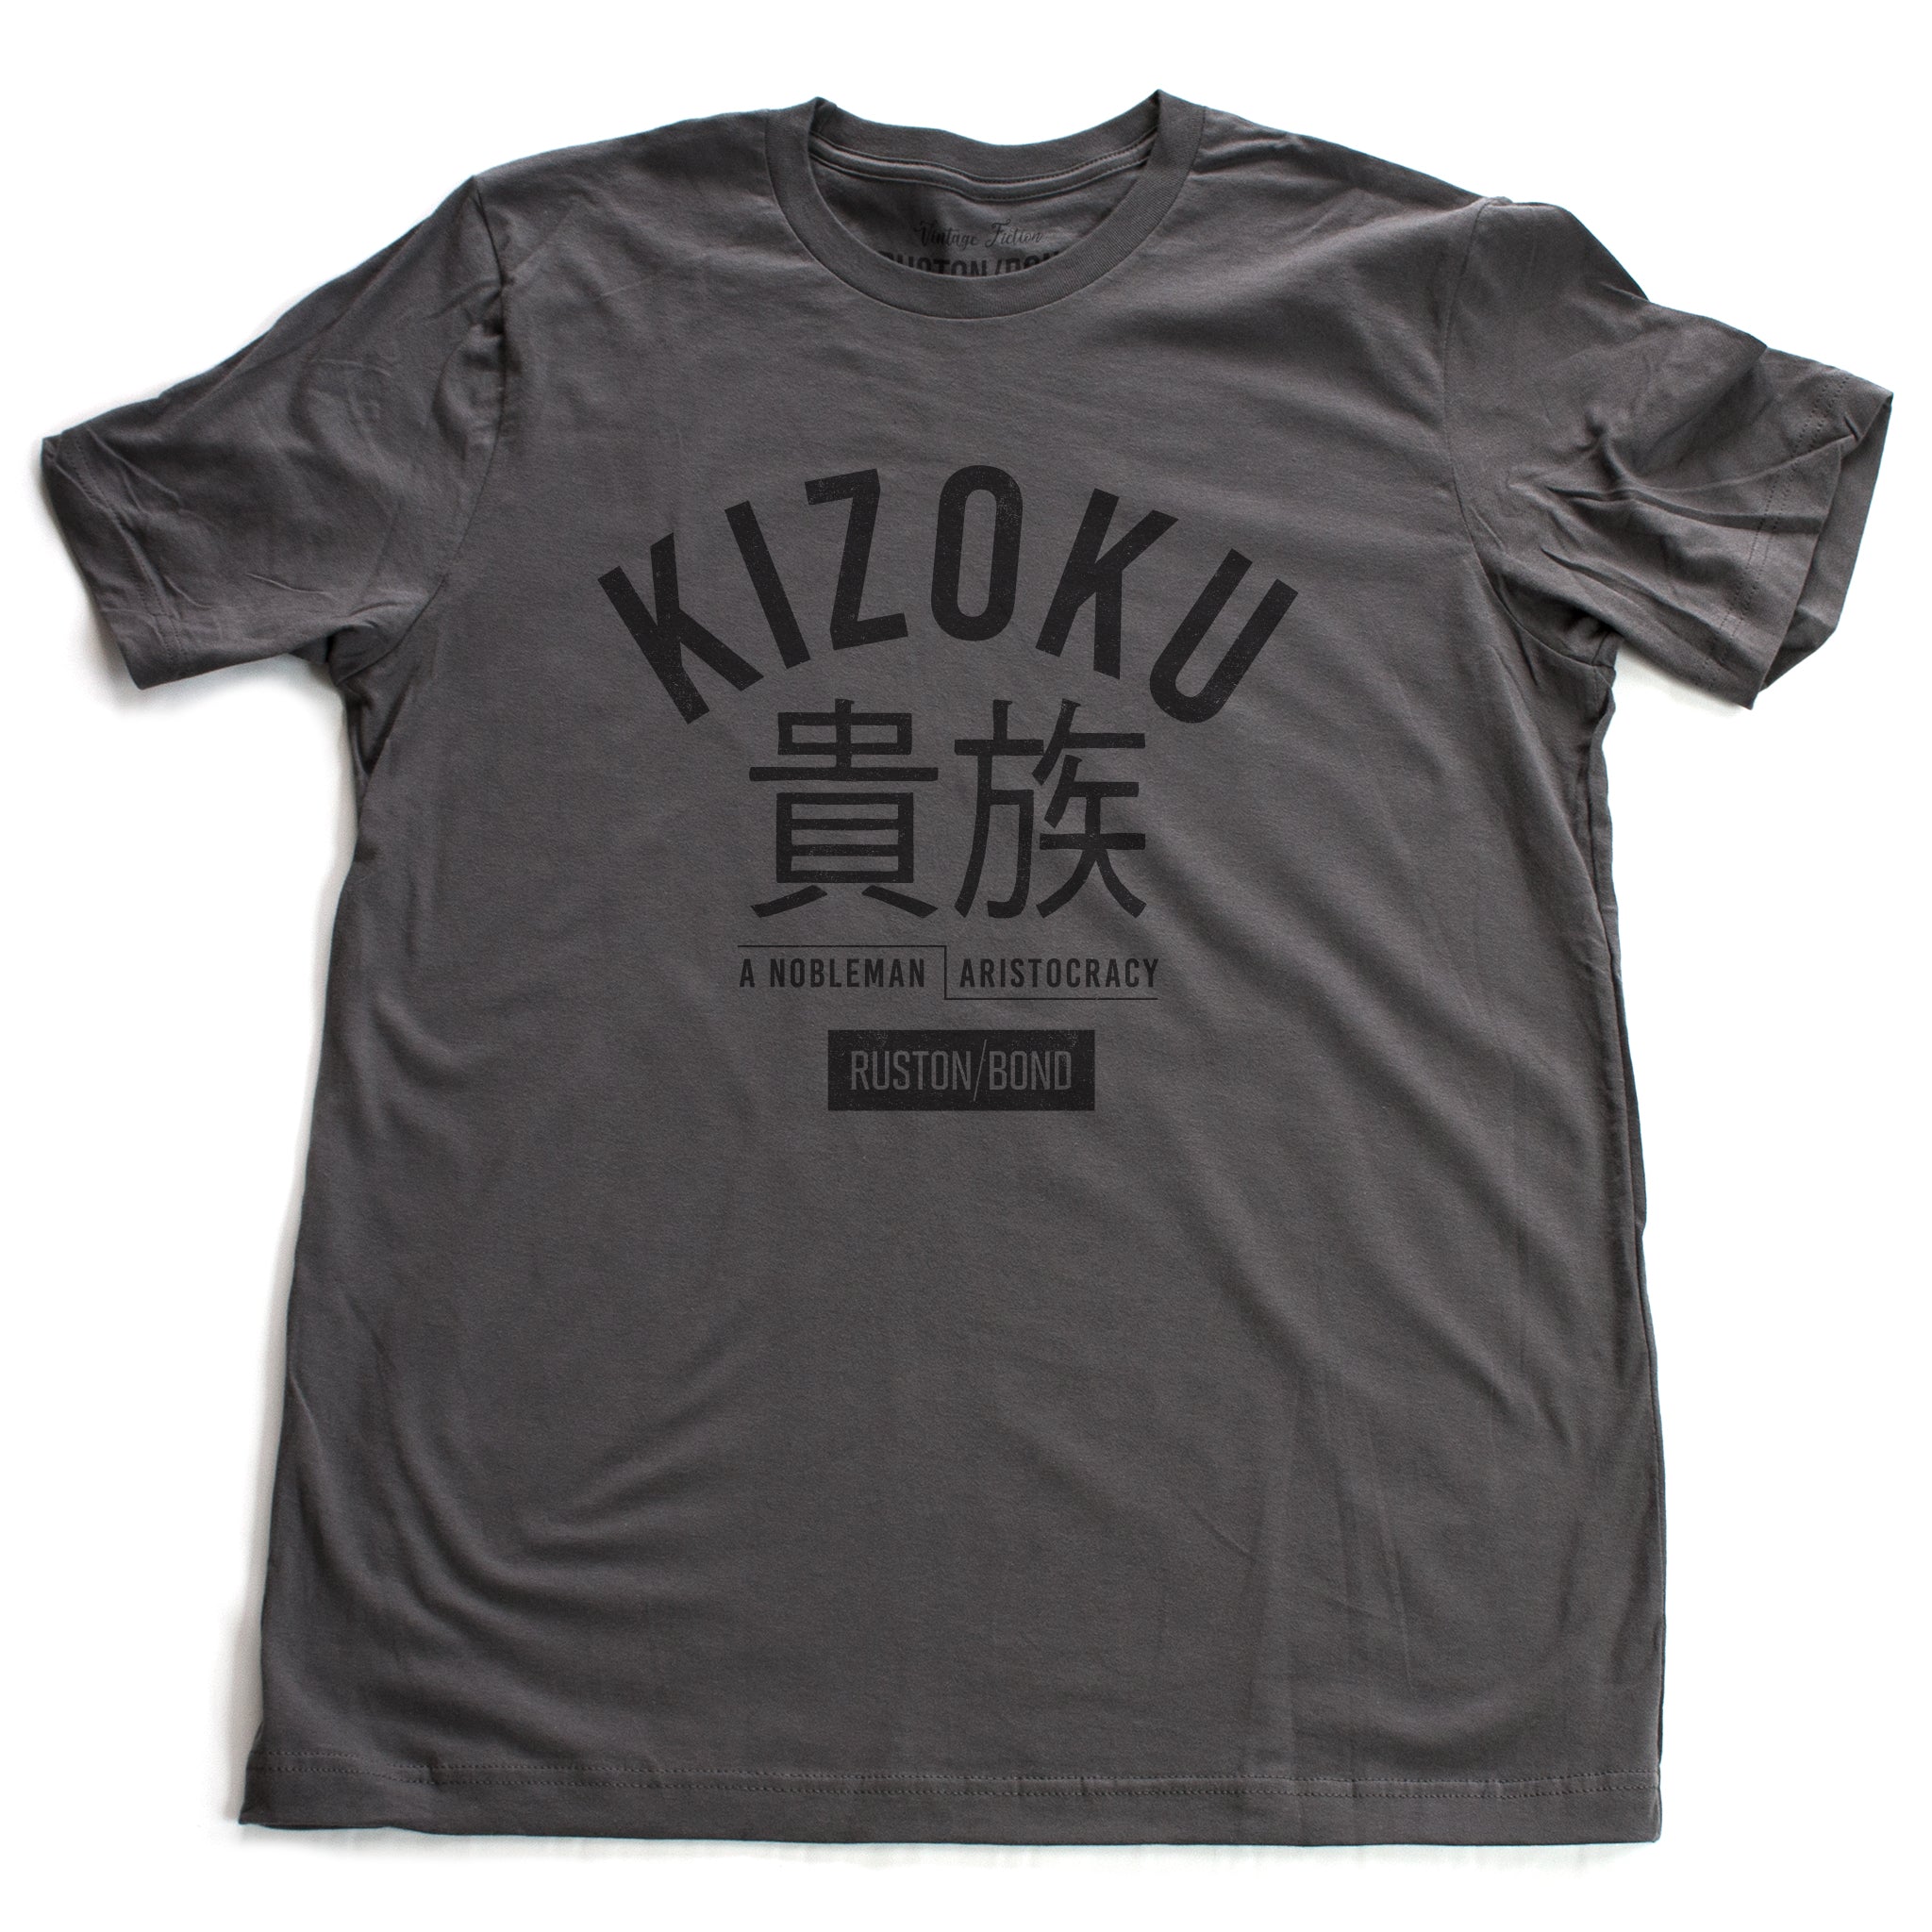 A retro fashion t-shirt in Asphalt Gray with the bold typographic of the Japanese word “KIZOKU” and “a nobleman / aristocracy” below the Japanese characters. By the fashion brand Ruston/Bond, from wolfsaint.net. 